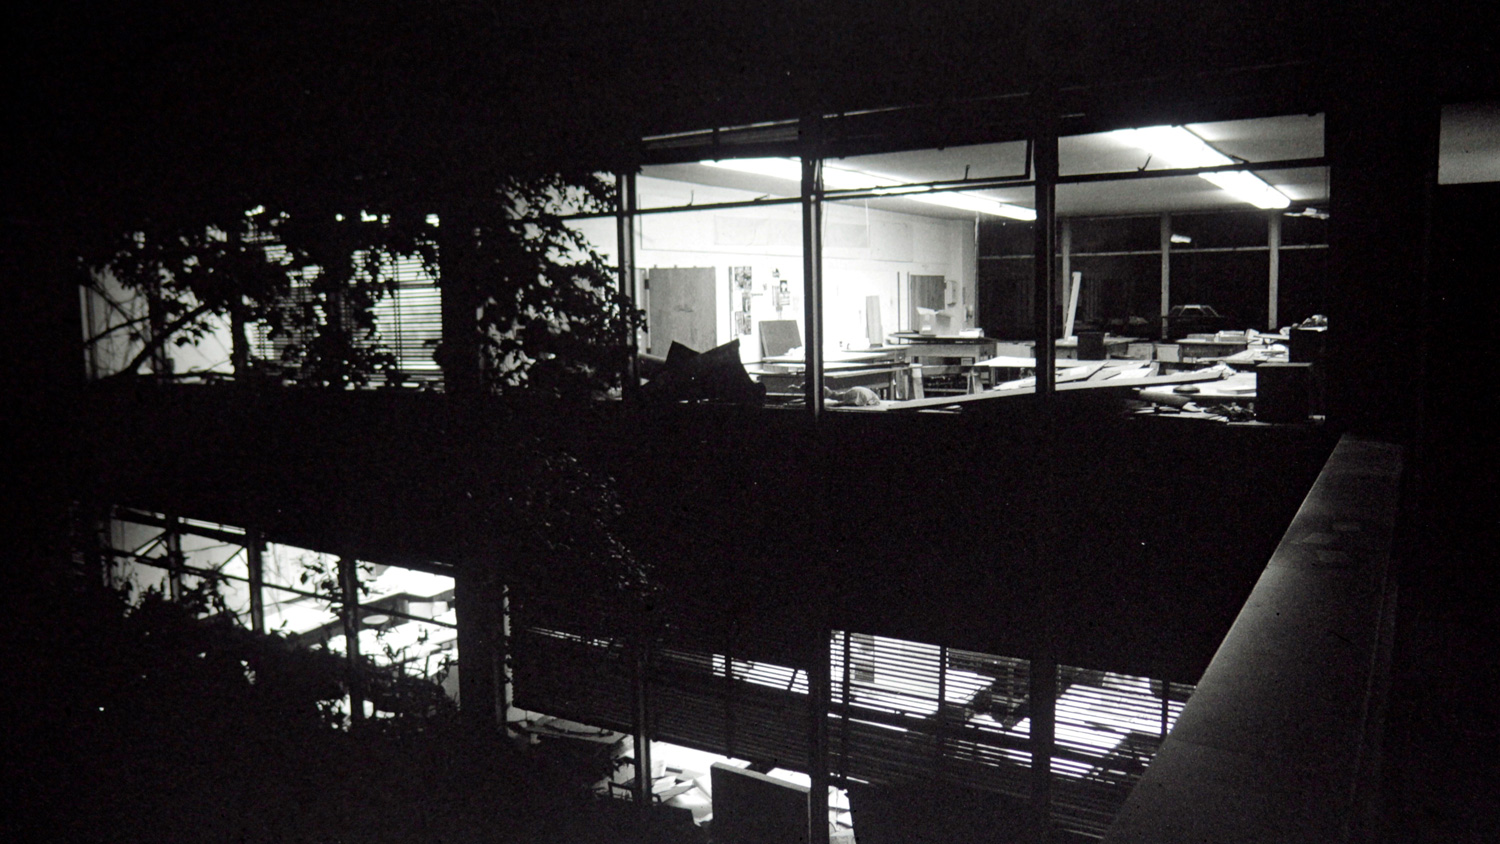 School of Design Addition (now Kamphoefner Hall), 1972. Photo by Pat Rand.